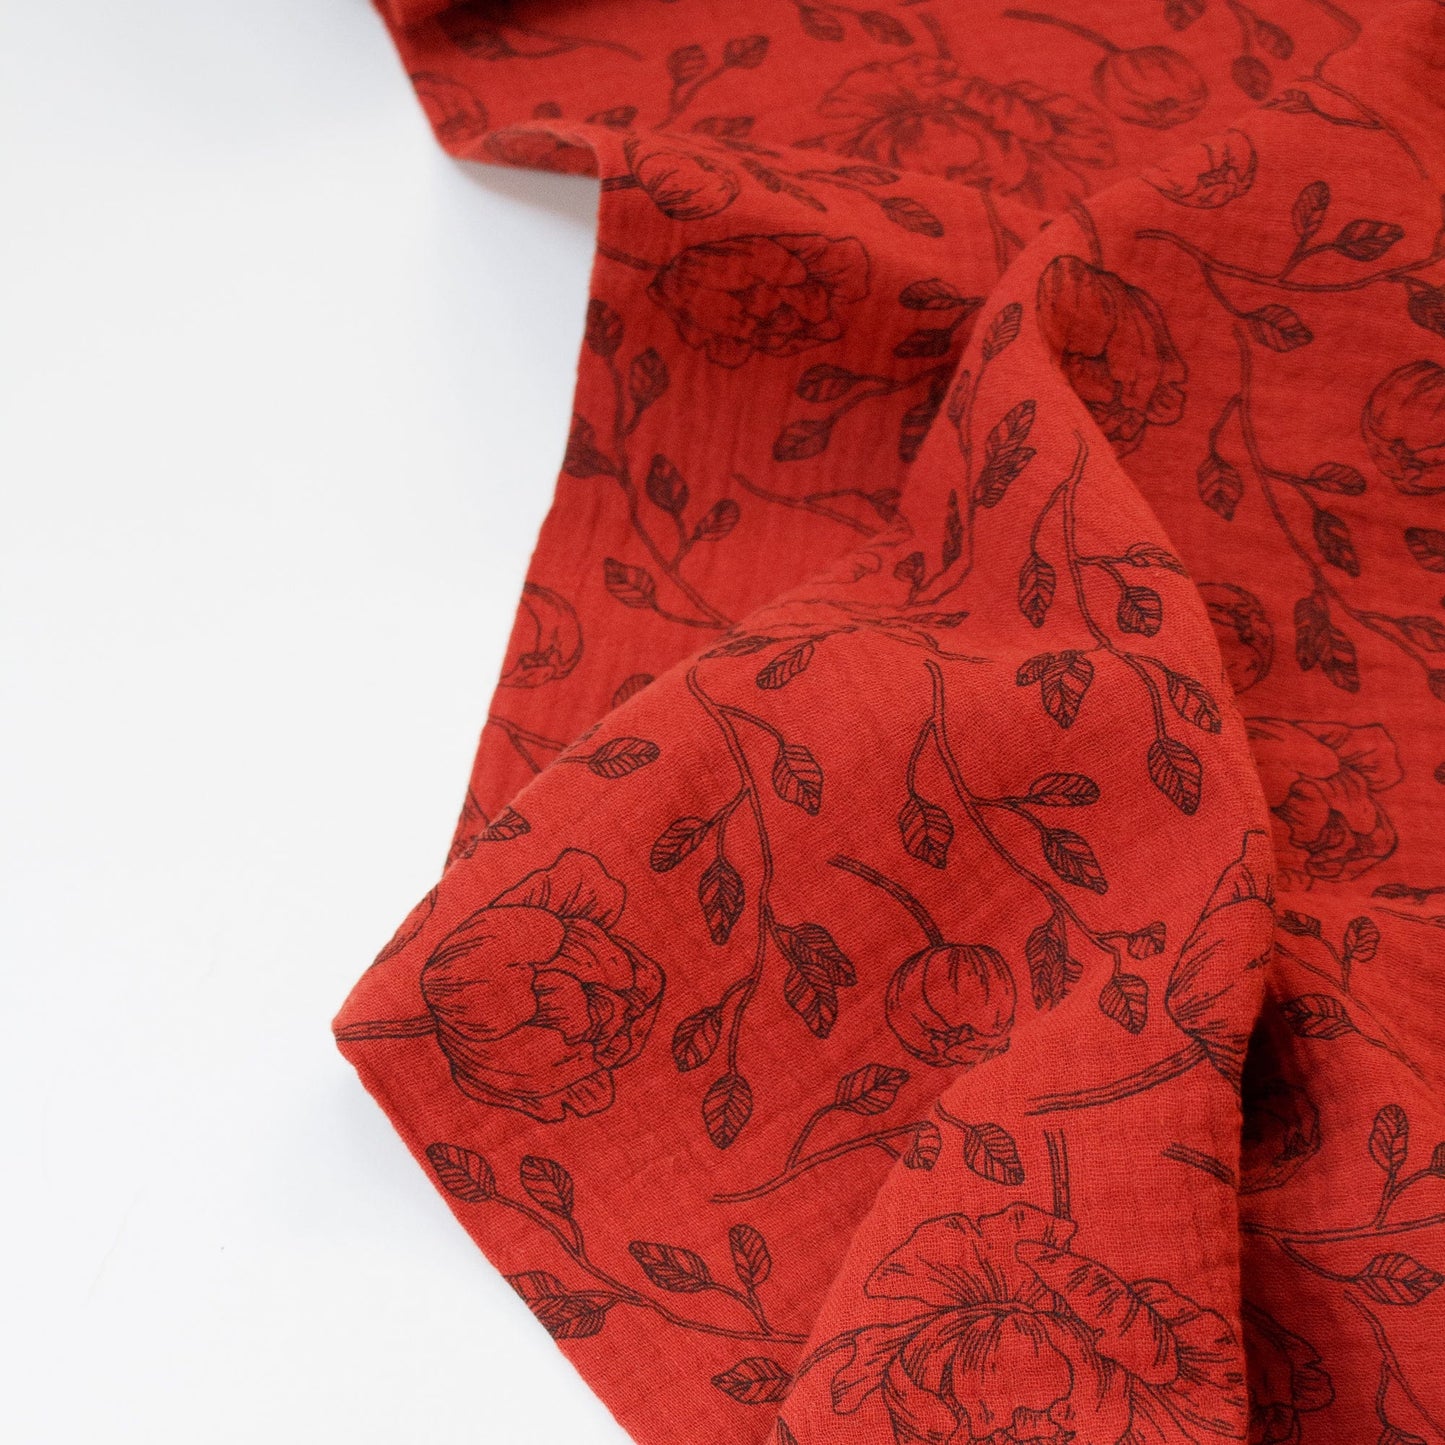 Cotton Double Gauze in Red with Rose Print